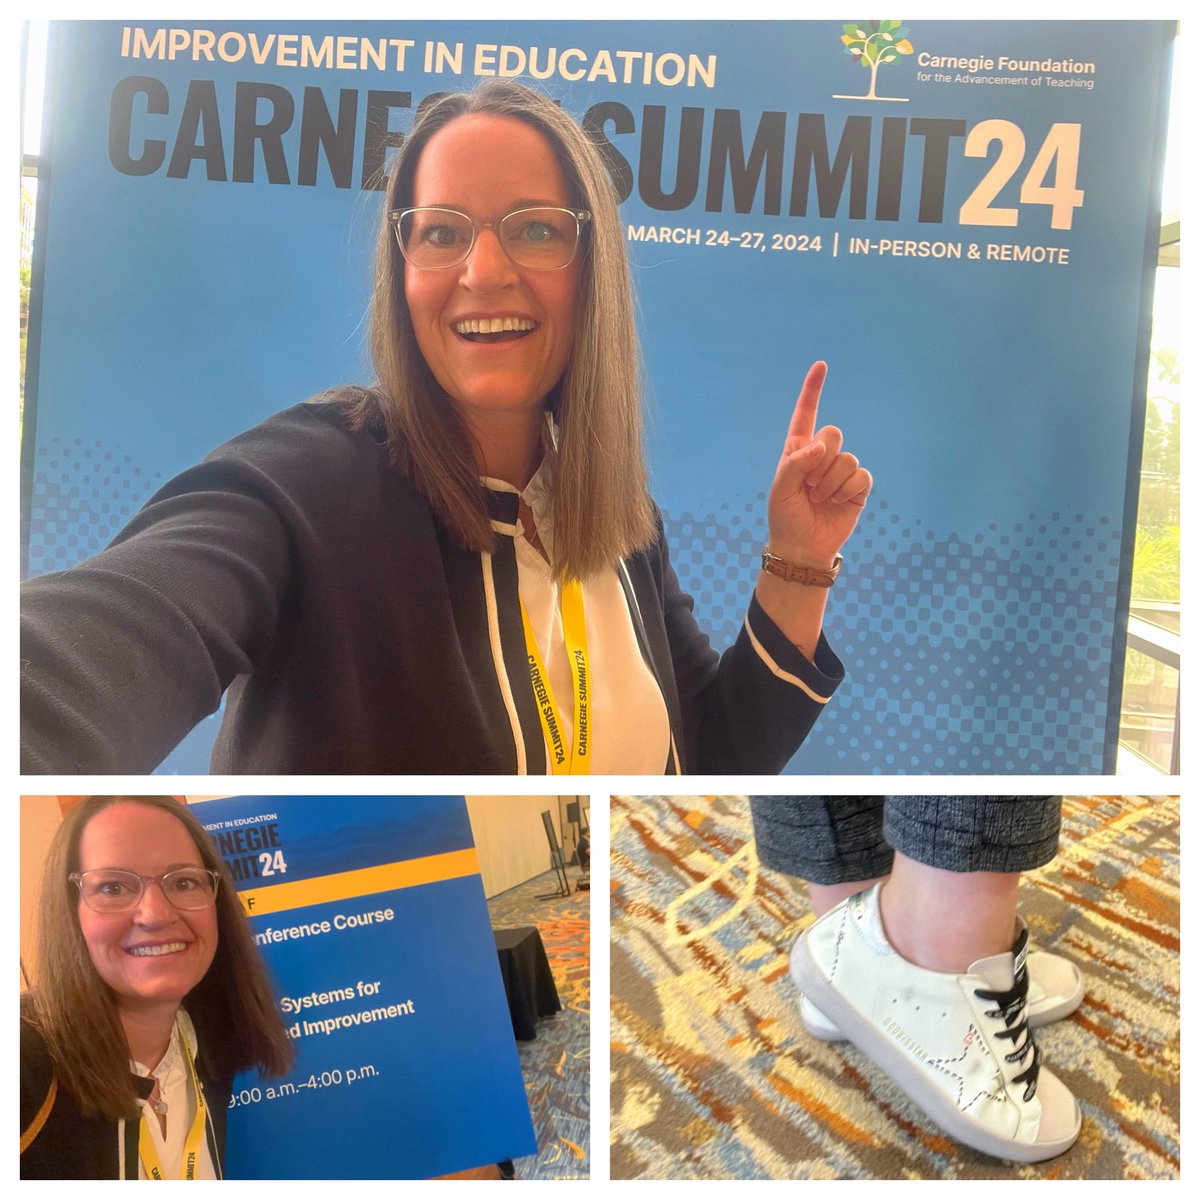 It’s Sunday Sneaker Day at #CarnegieSummit24, because we are READY! Let’s goooo! @CarnegieFdn